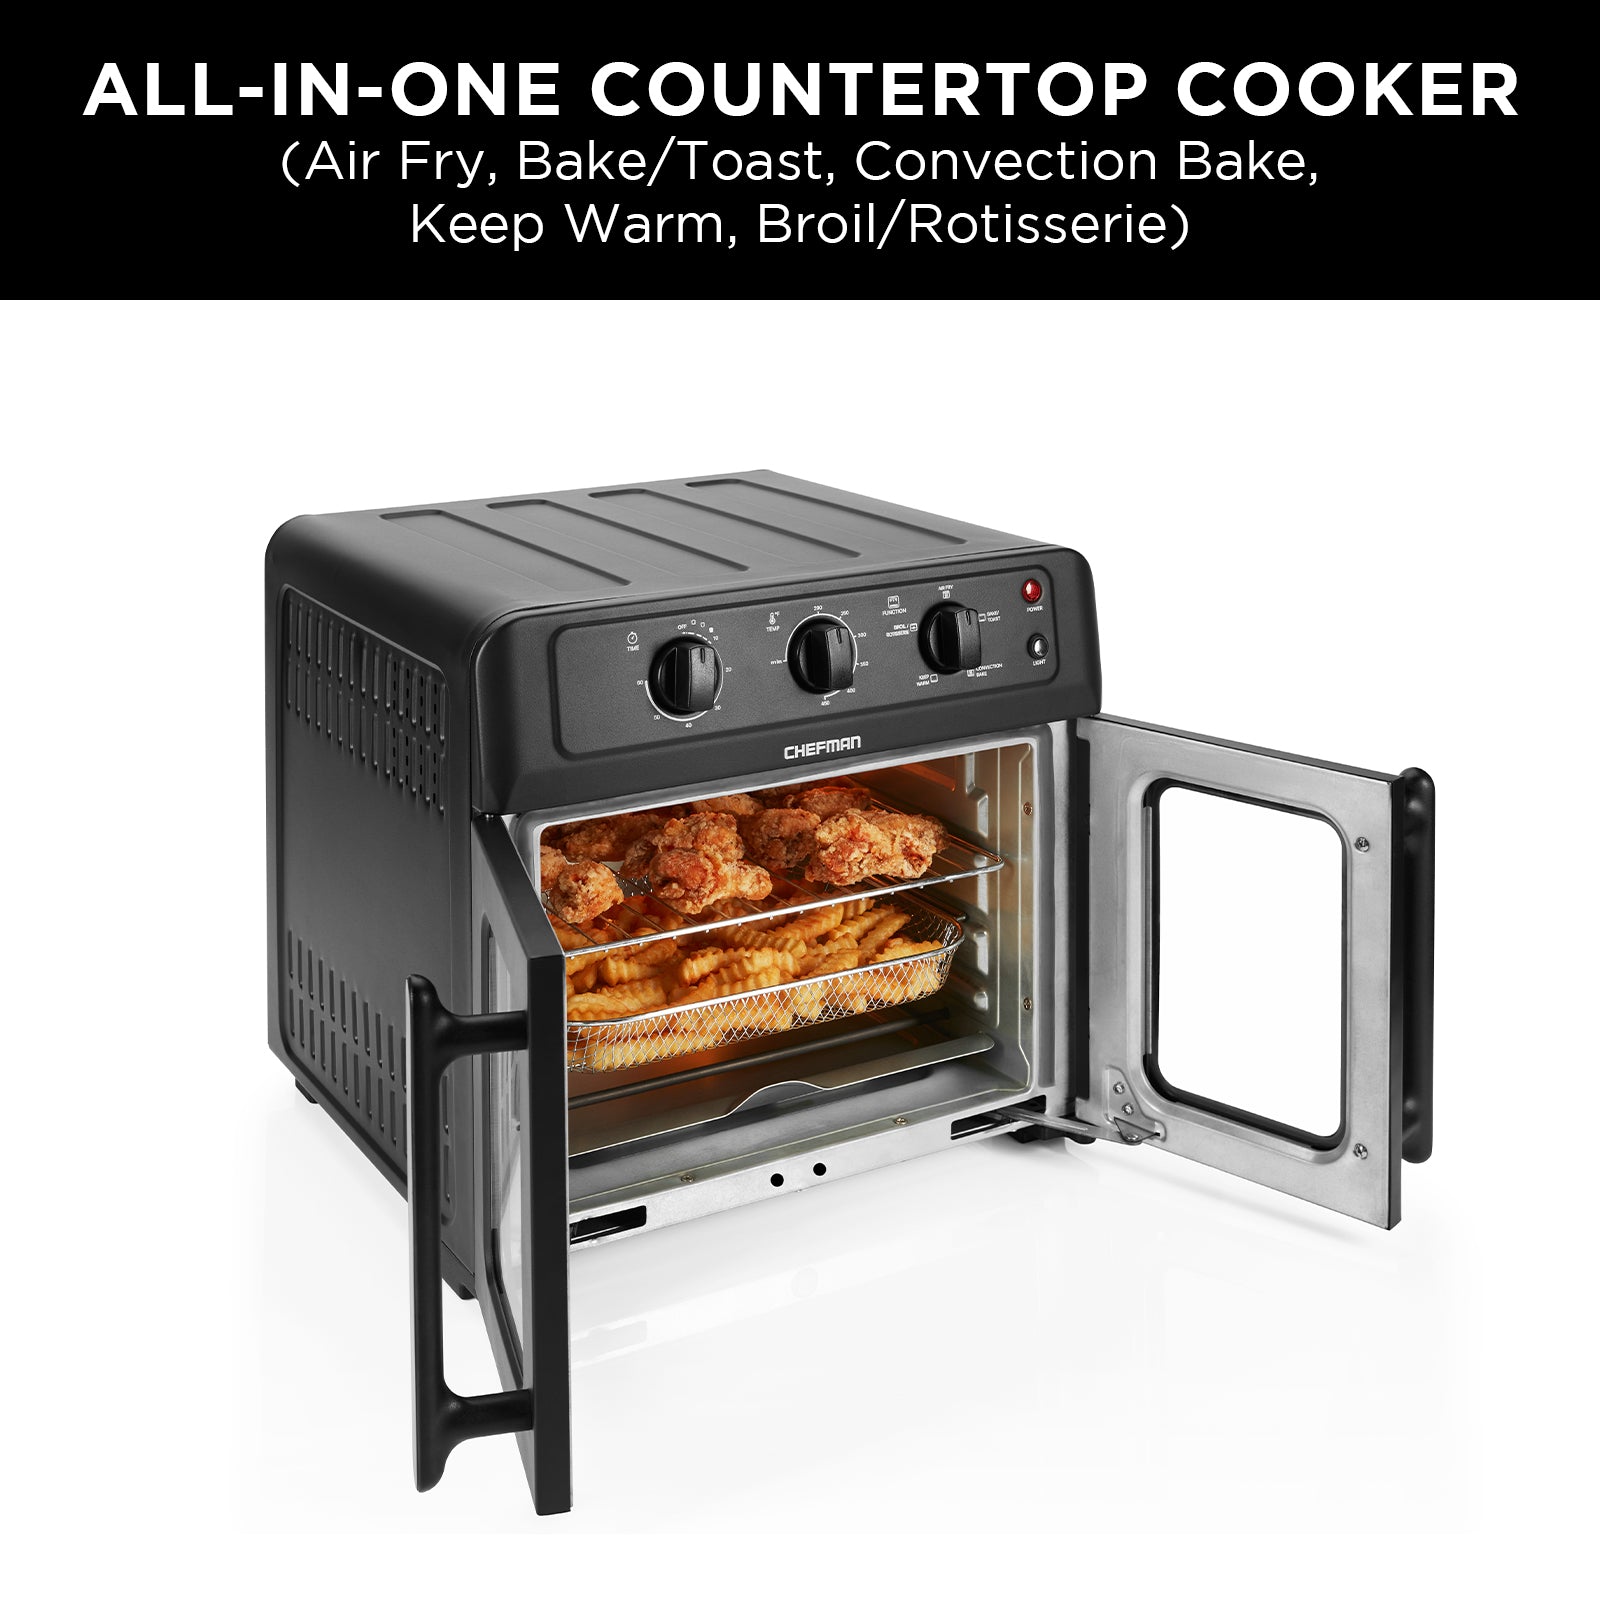 Chefman Air Fryer Toaster Oven, 6 Slice, 26 QT Convection AirFryer w/ Auto  Shut-Off, 60 Min Timer; Roast, Bake, Fry Oil-Free, Nonstick Interior,  Accessories & Cookbook Included, Stainl 